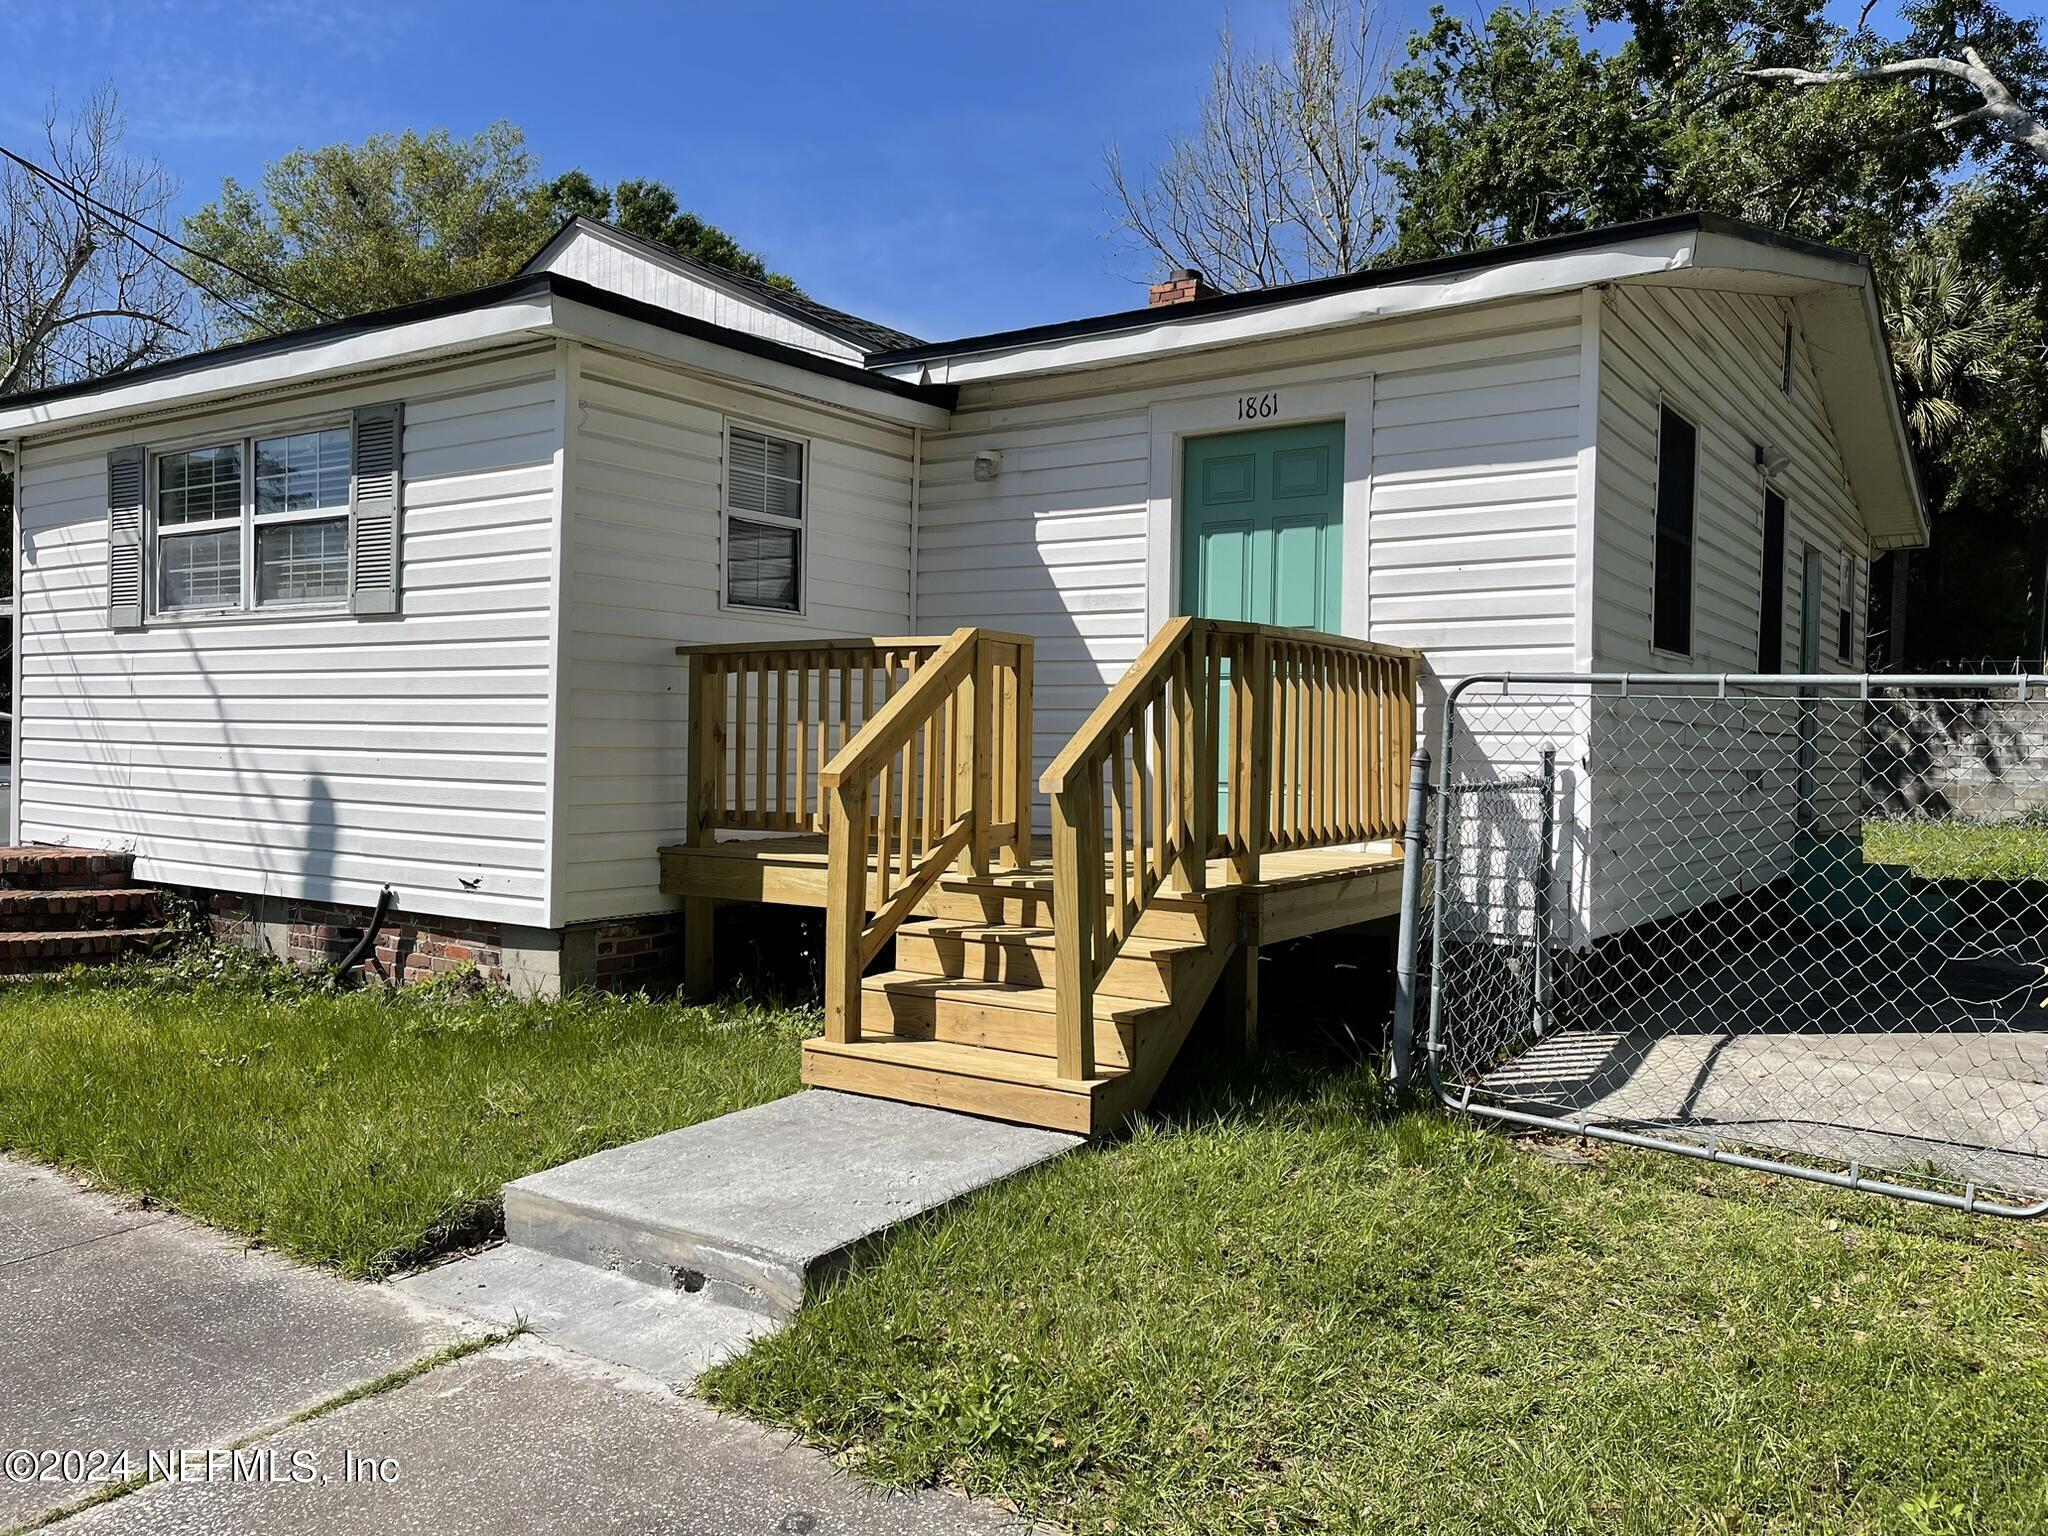 Jacksonville, FL home for sale located at 1861 W 6TH ST Street, Jacksonville, FL 32209